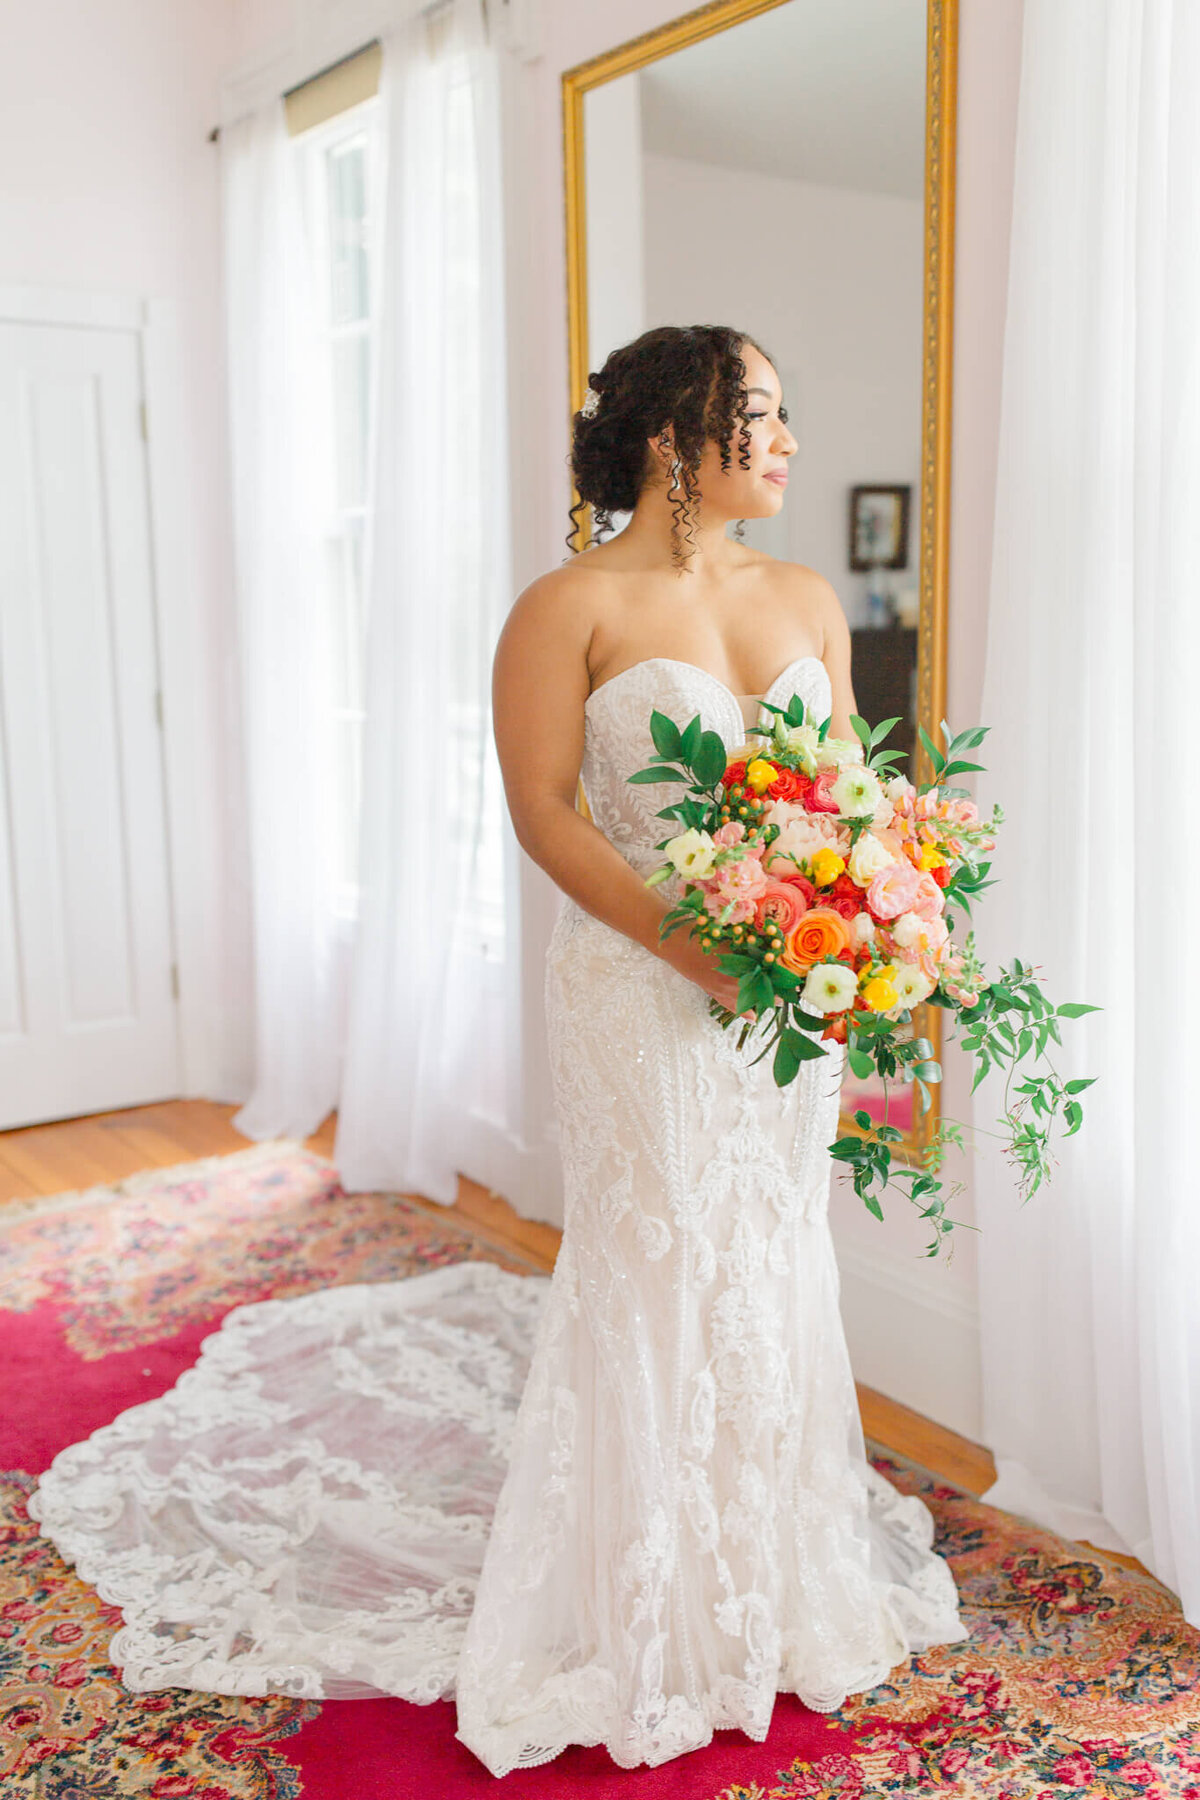 Beautiful bride during bridal portraits at Guildford Farm. Taken by Washington DC Wedding Photographer Bethany Aubre Photography.